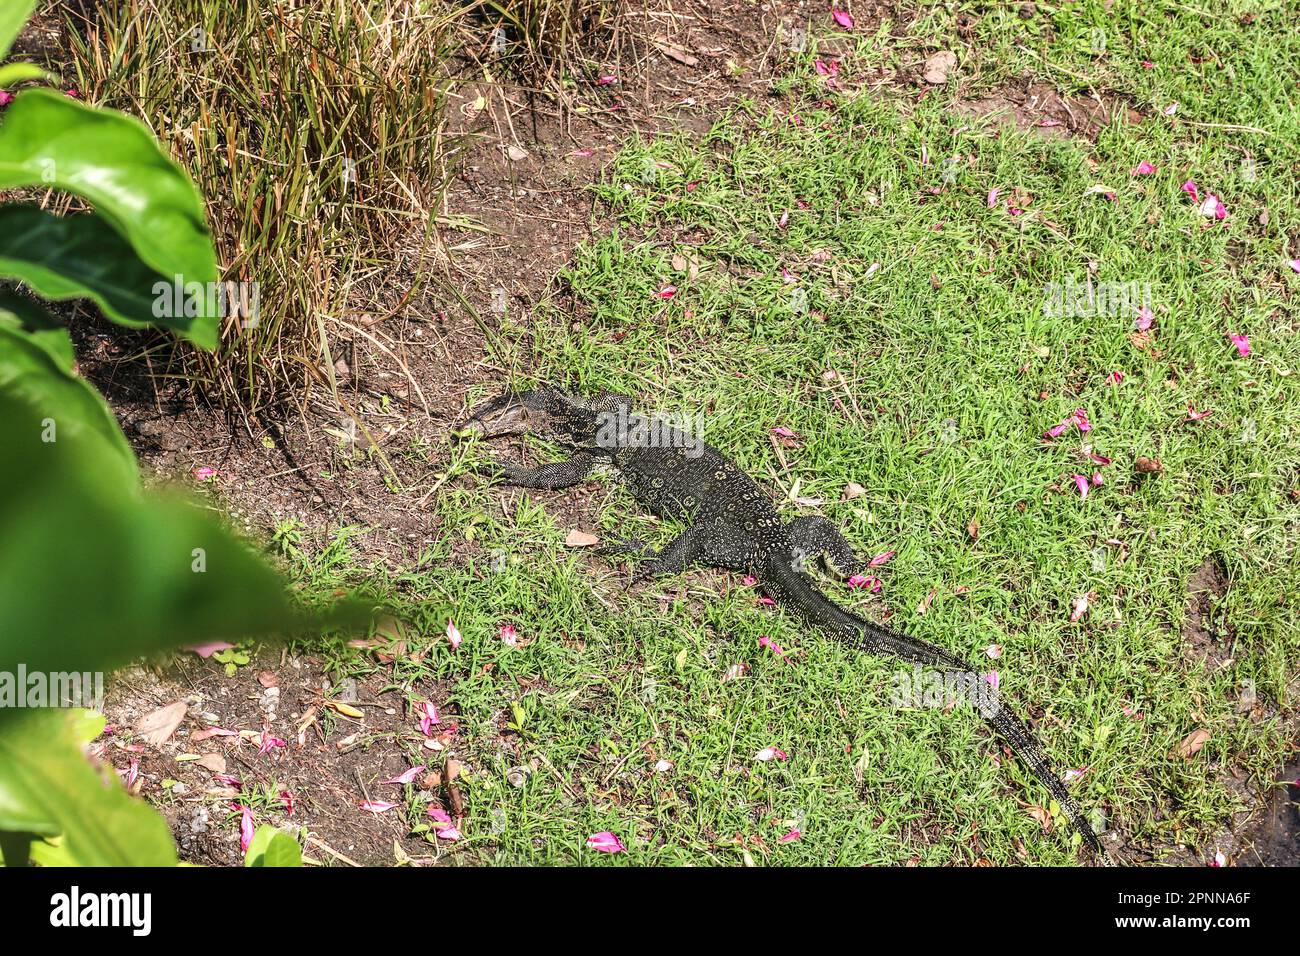 Water Monitor, Varanus salvator, climbed out of the water to bask in the sun at a park in Bangkok, Thailand. Stock Photo